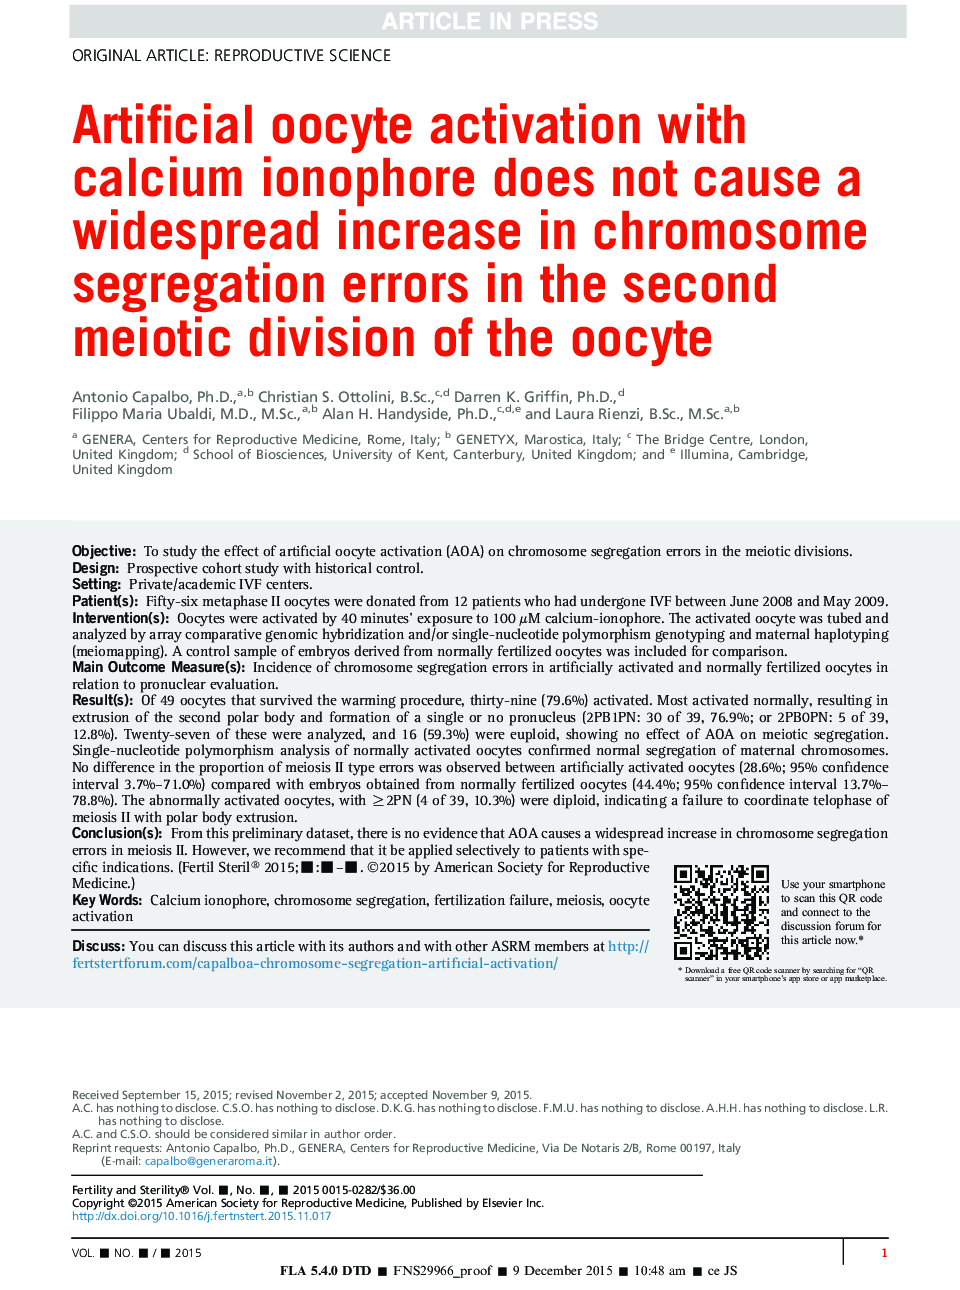 Artificial oocyte activation with calcium ionophore does not cause a widespread increase in chromosome segregation errors in the second meiotic division of the oocyte